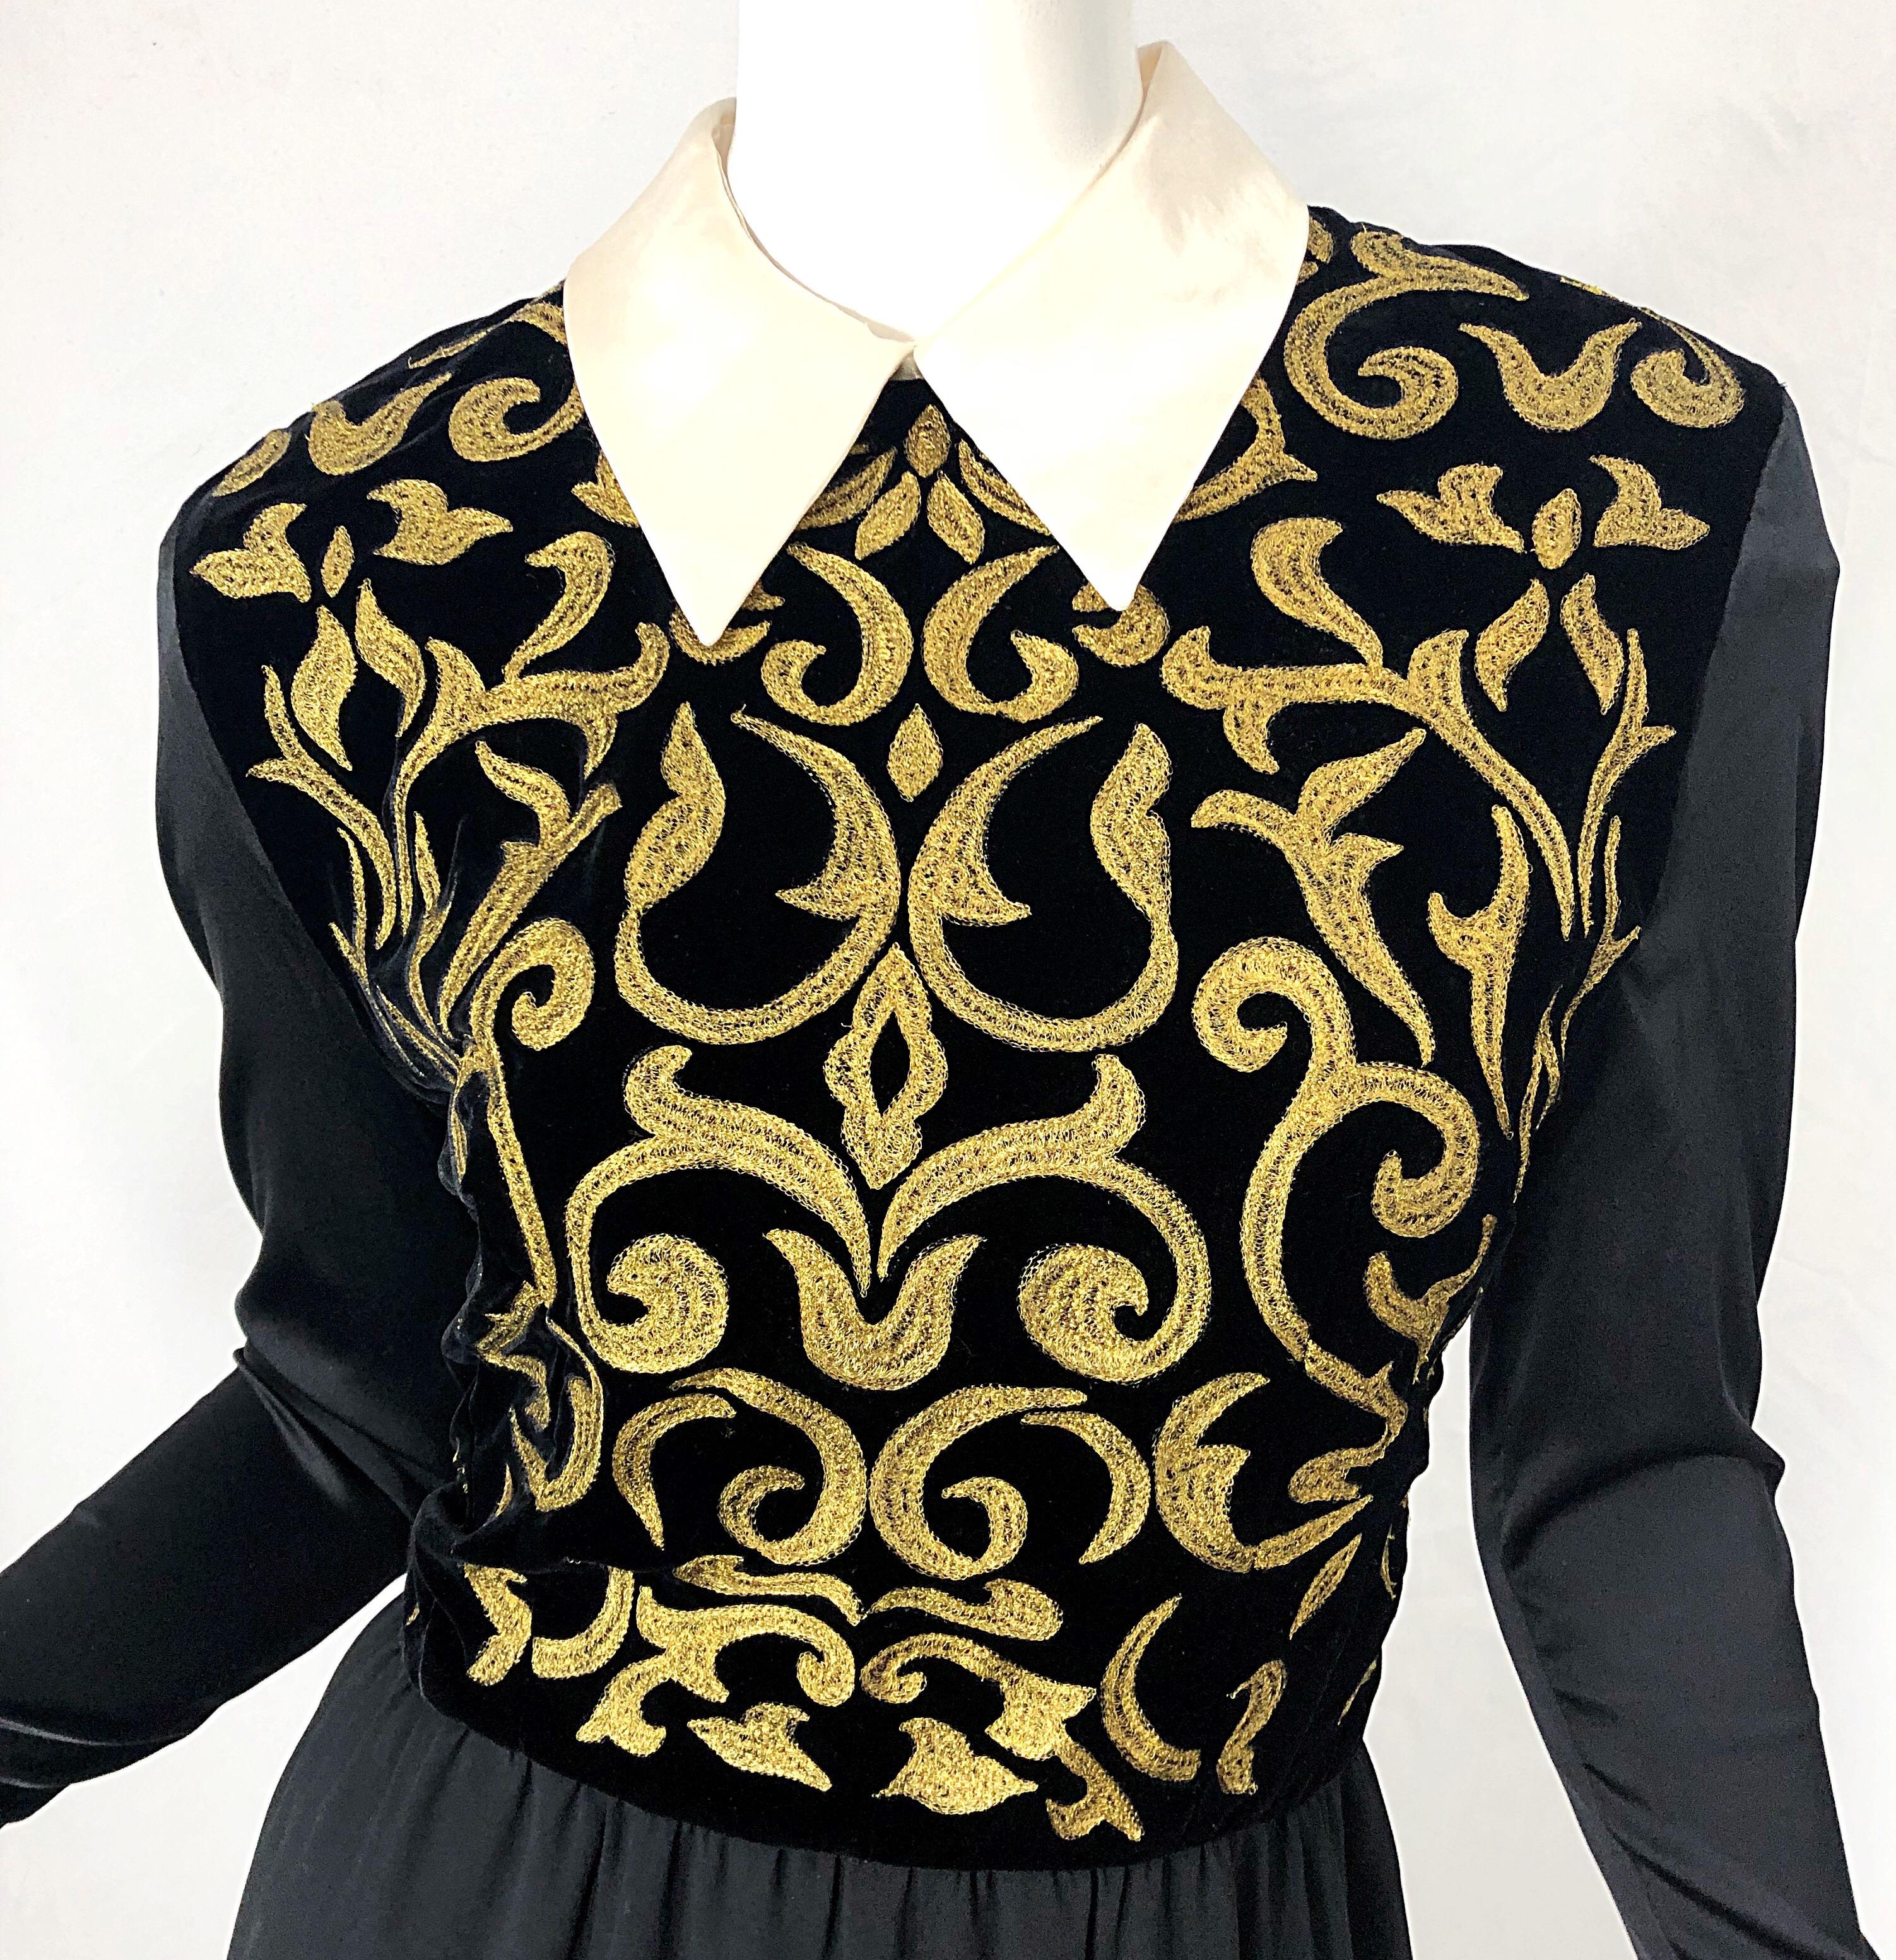 Karl Lagerfeld Runway Fall 1988 Black Gold Embroidered Vintage 80s Gown Dress In Excellent Condition For Sale In San Diego, CA